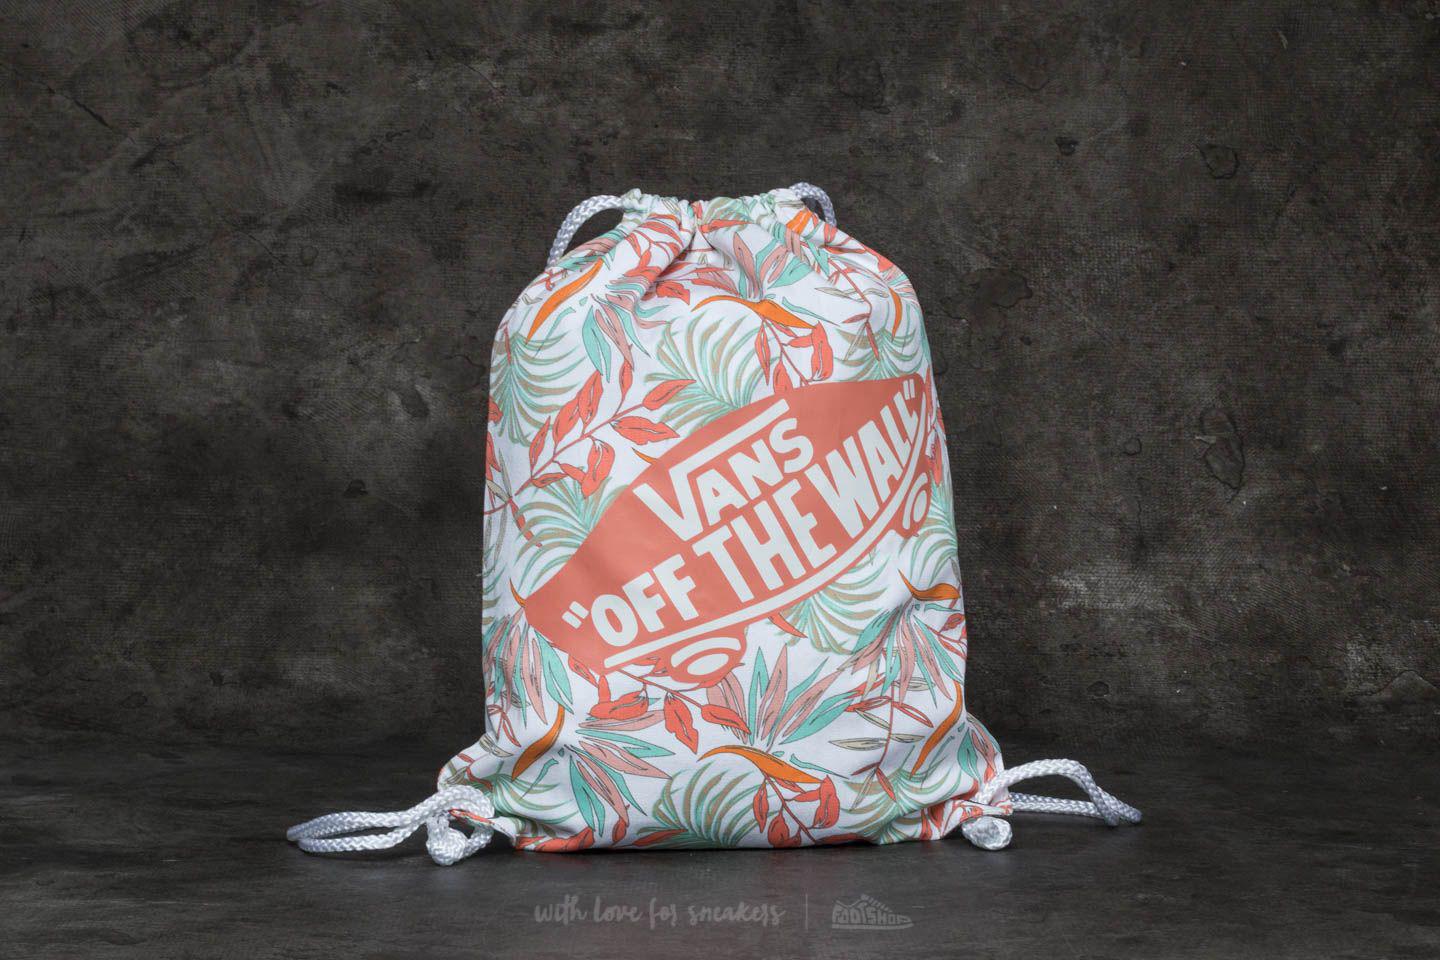 vans realm backpack white california floral